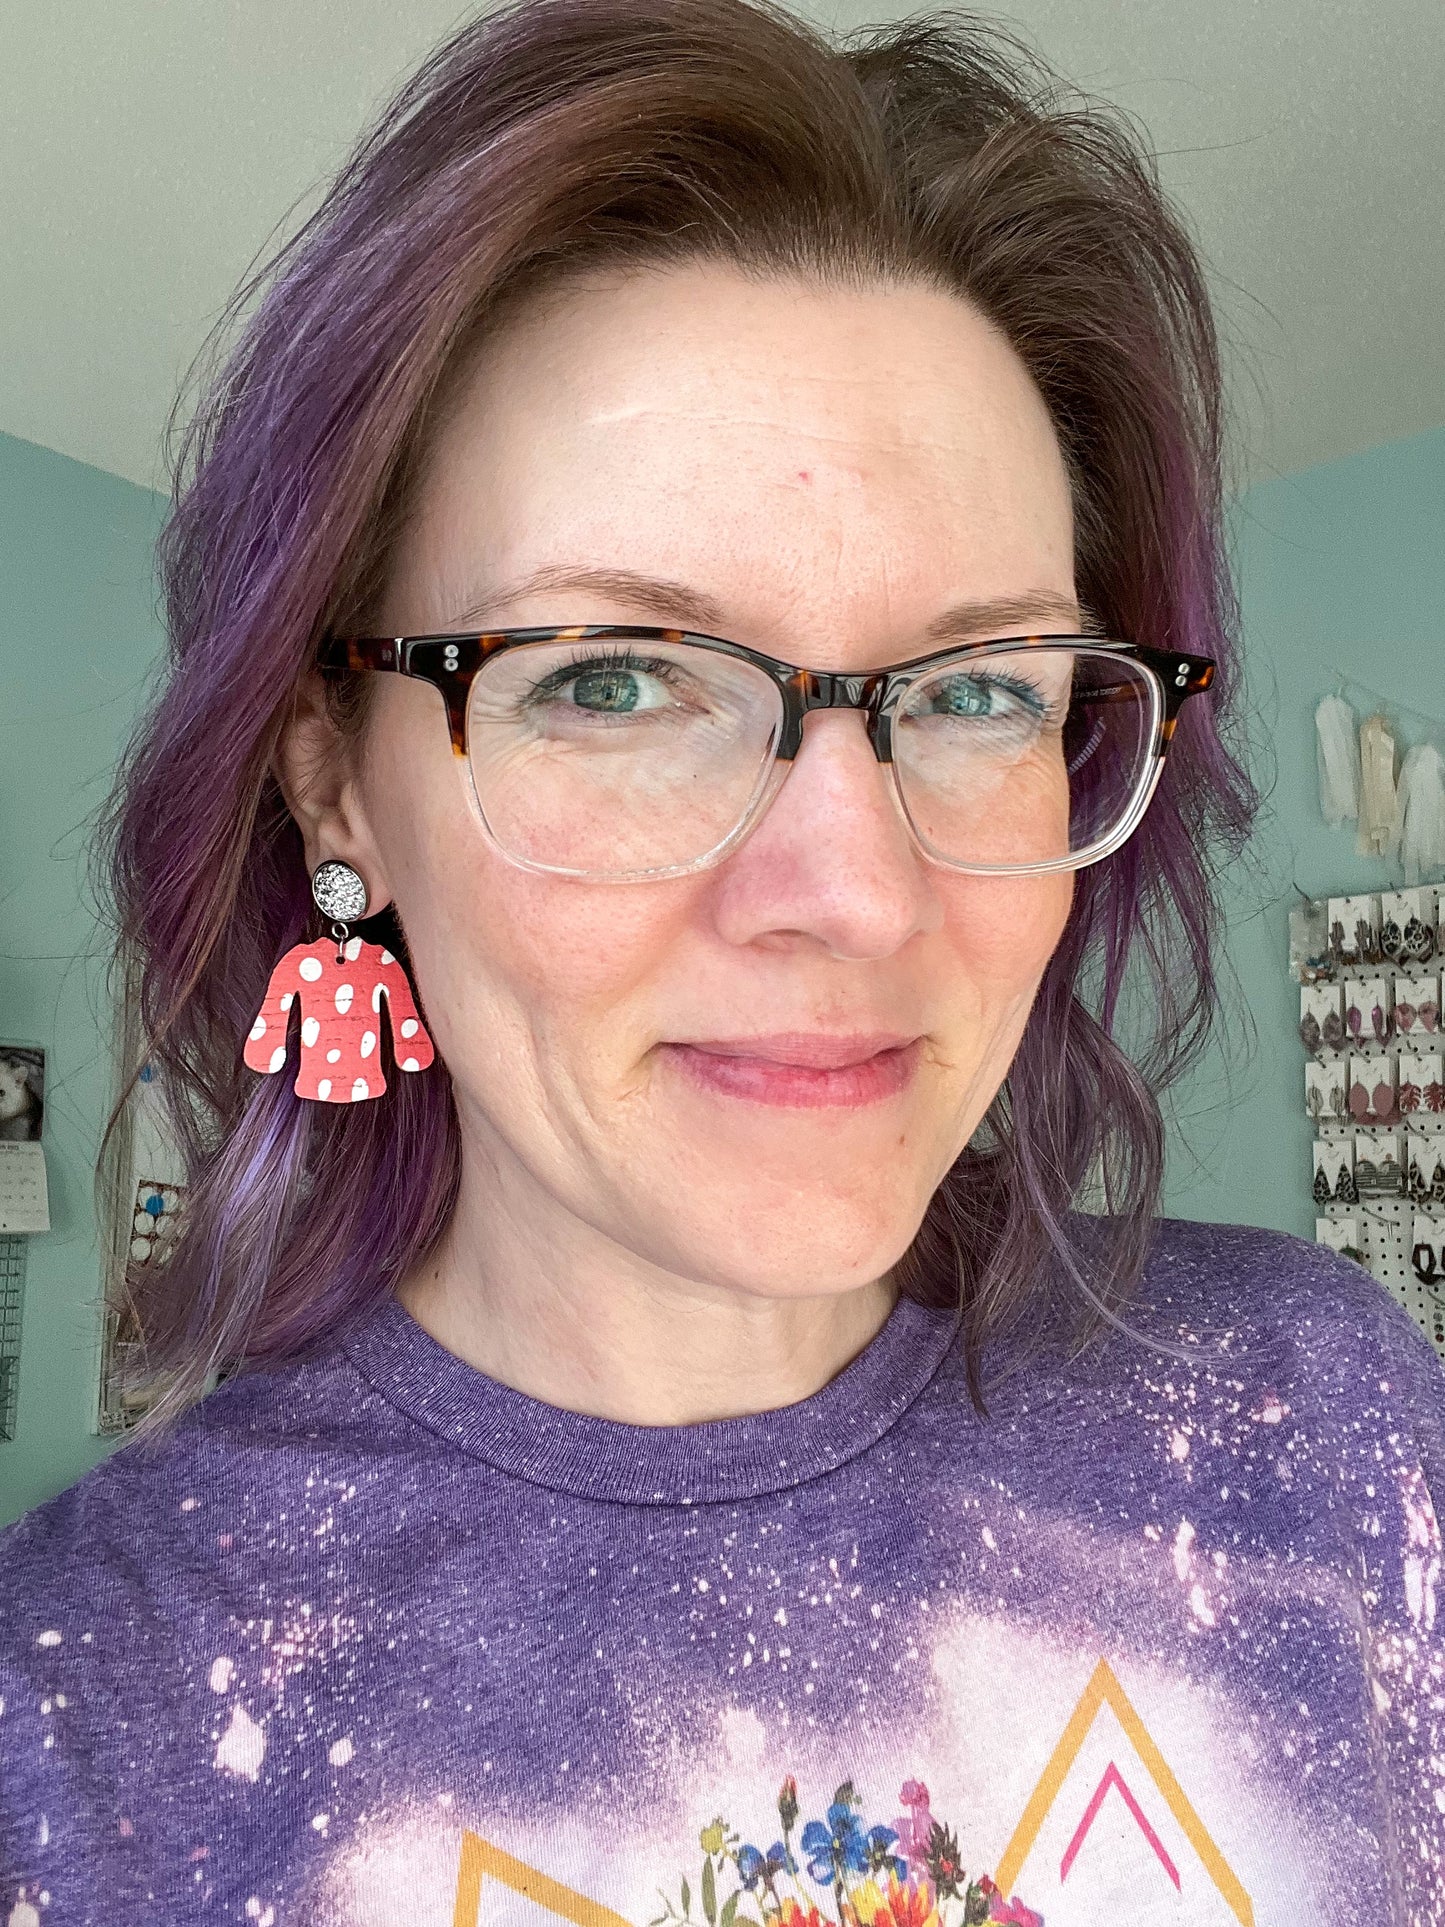 Red Spotted "Ugly" Sweater Cork on Leather Earrings - LAST CHANCE